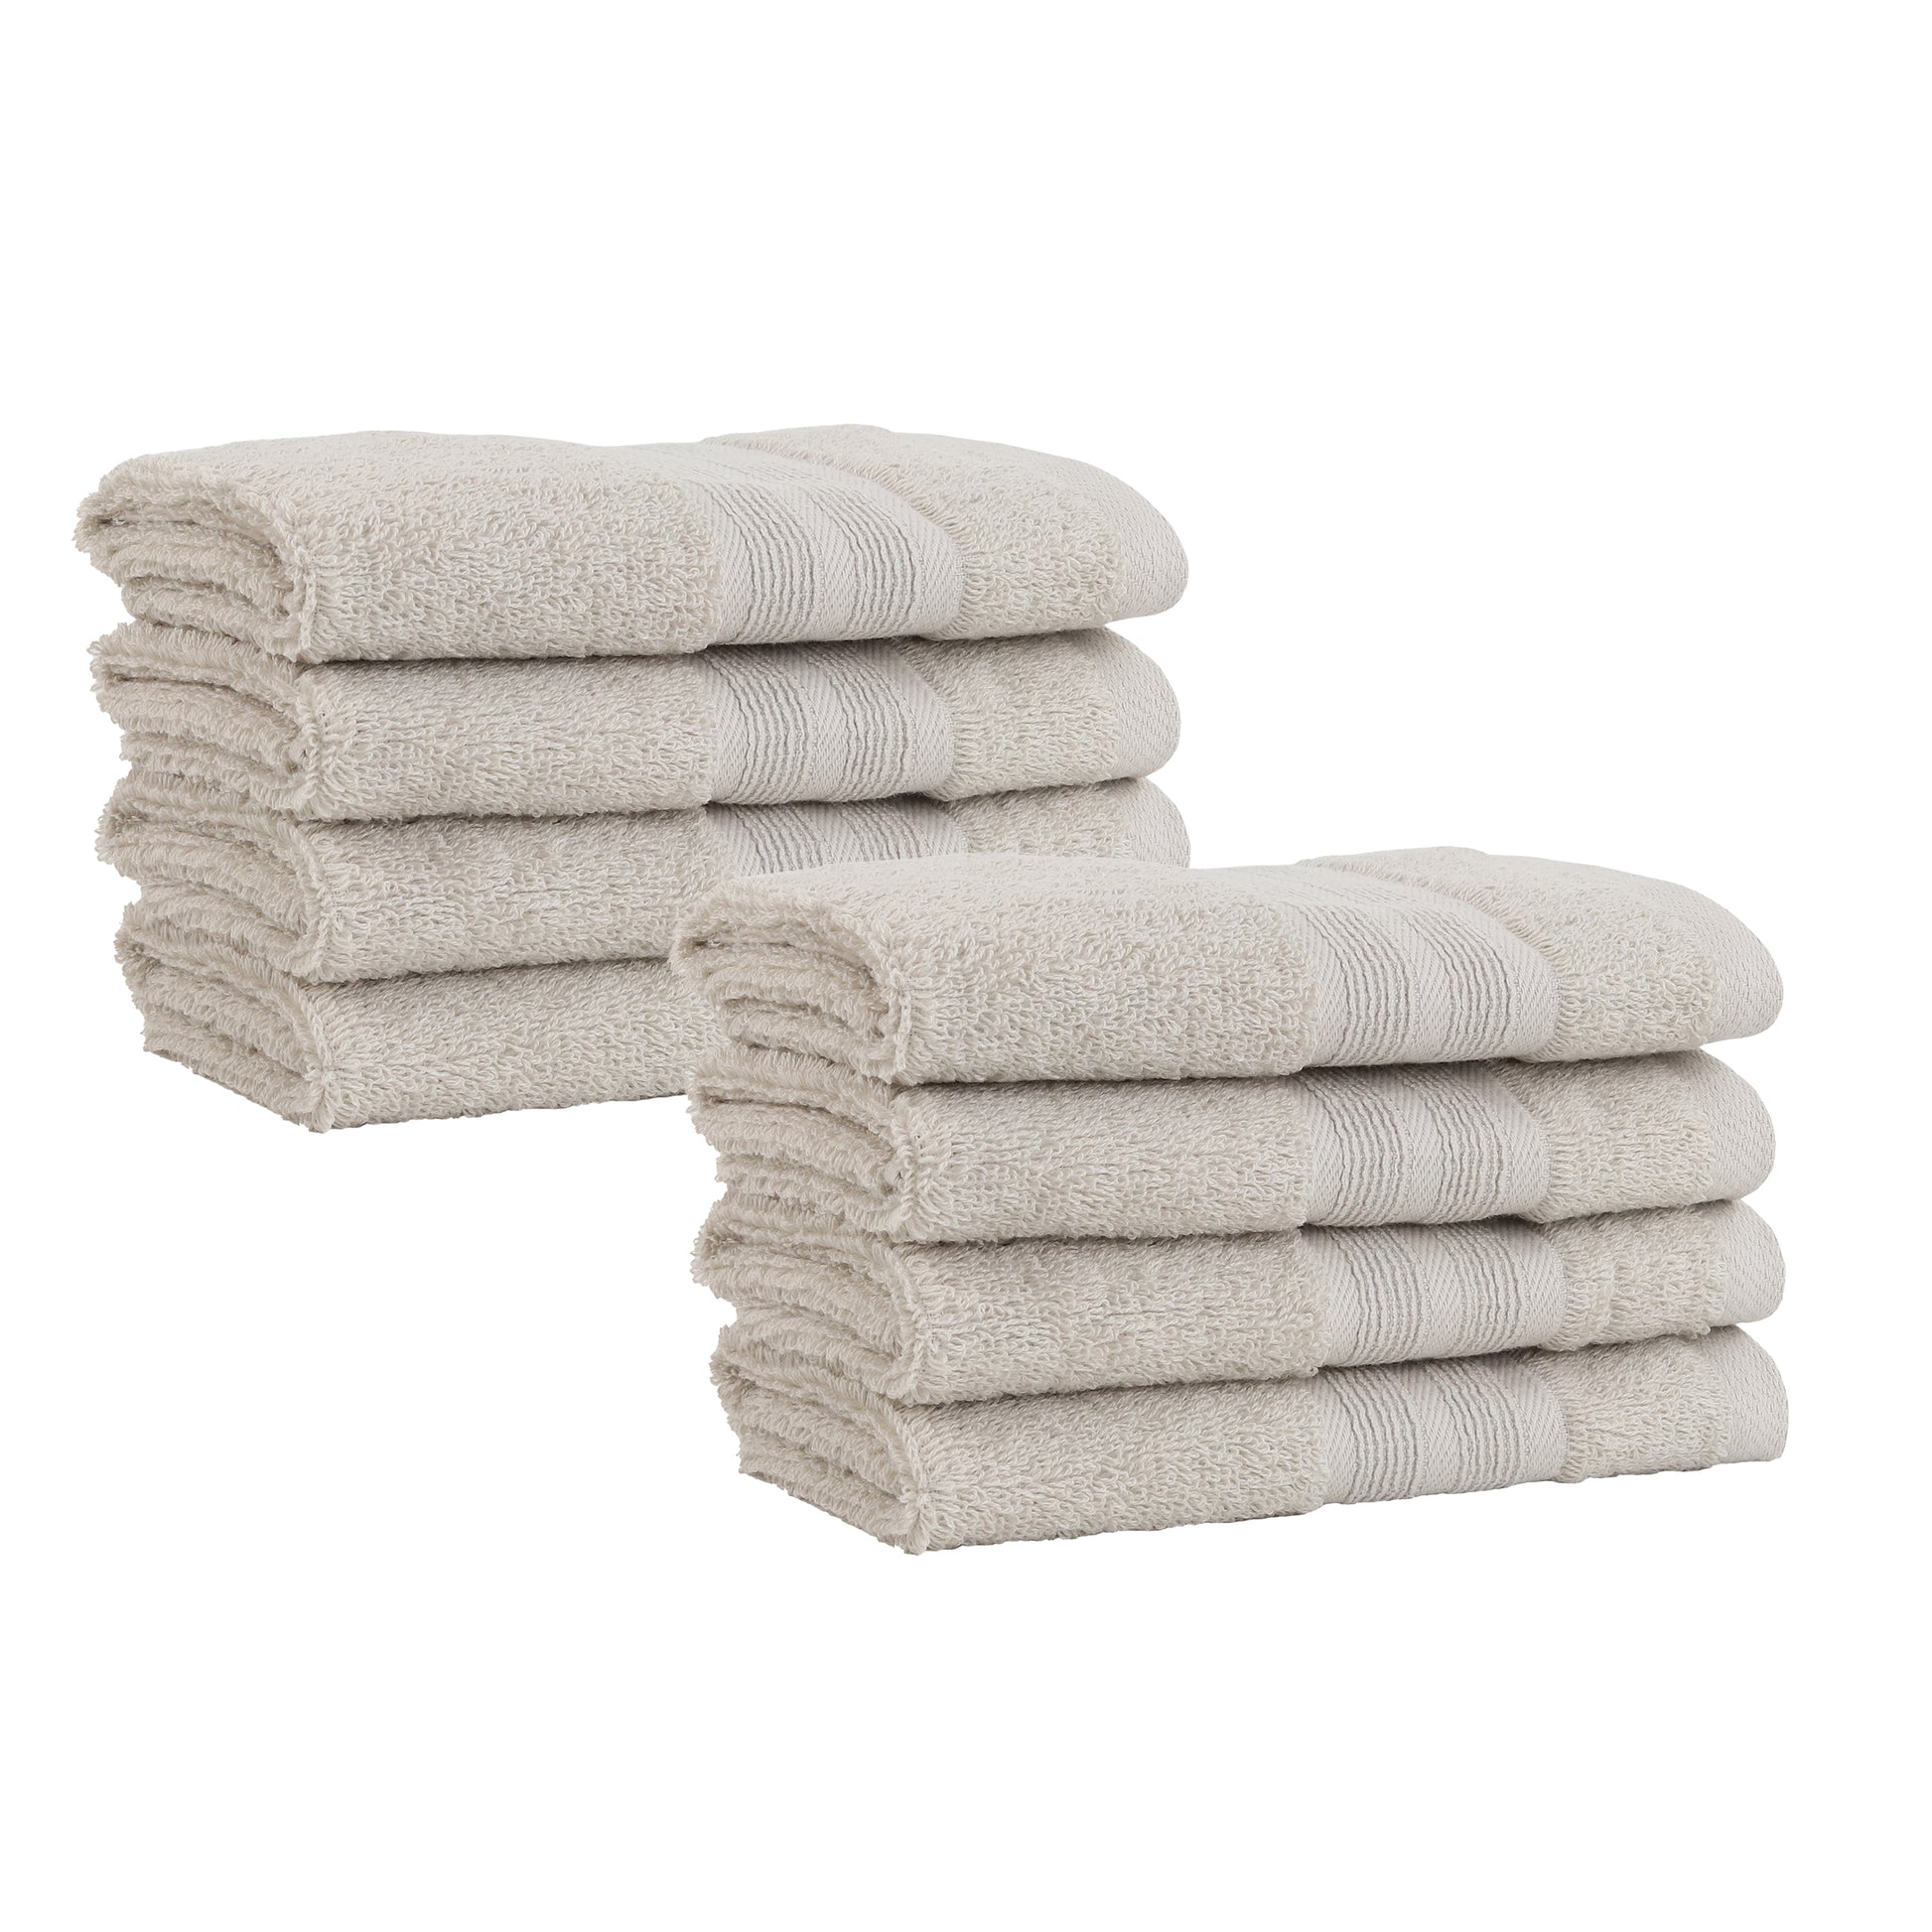 American Heritage by 1888 Mills - Luxury Hand Towel Set White / 4-Piece